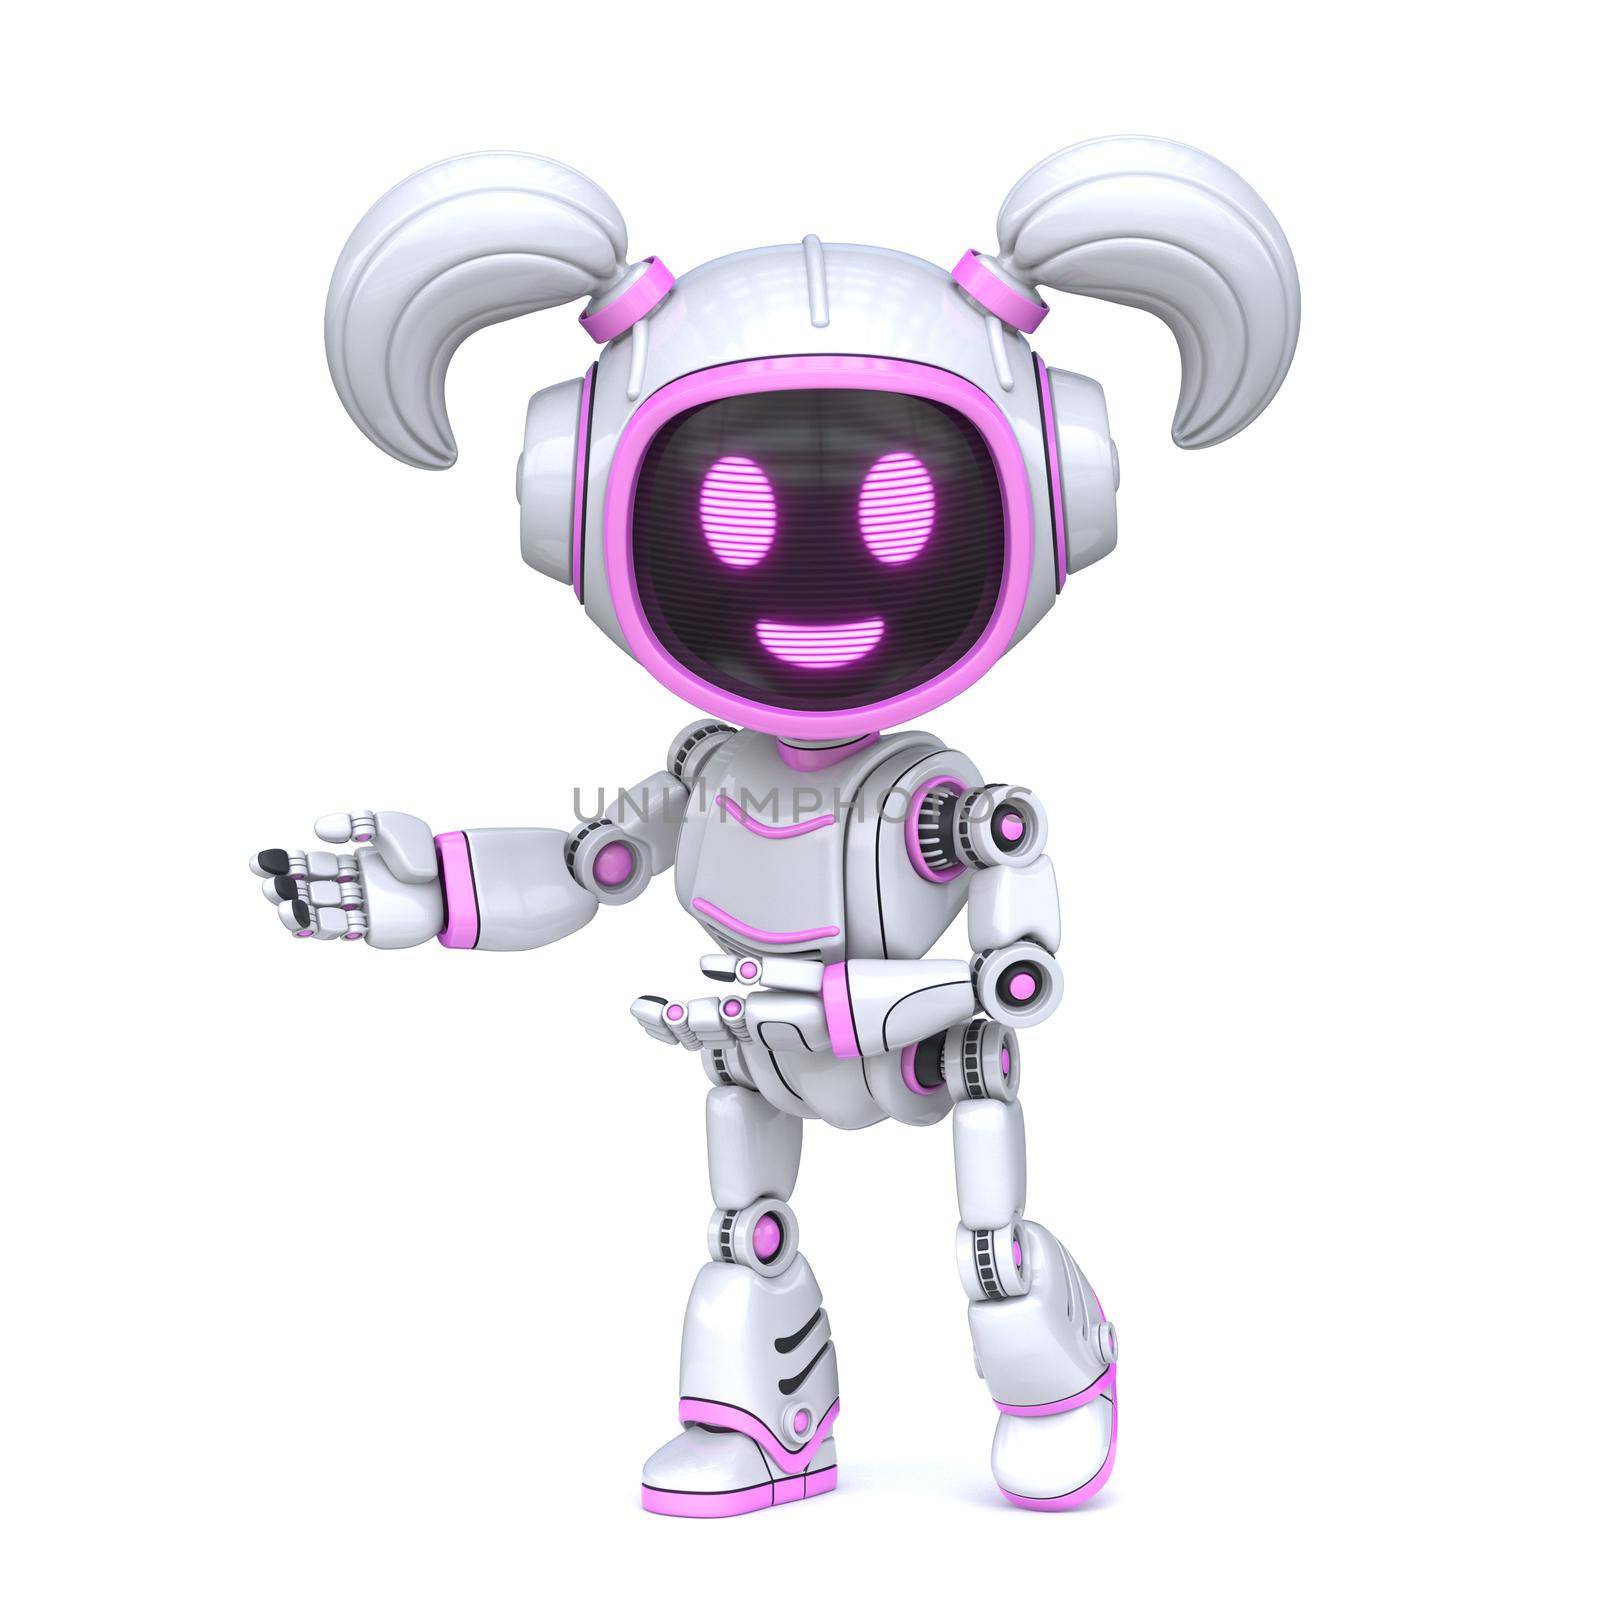 Cute pink girl robot welcoming gesture 3D by djmilic